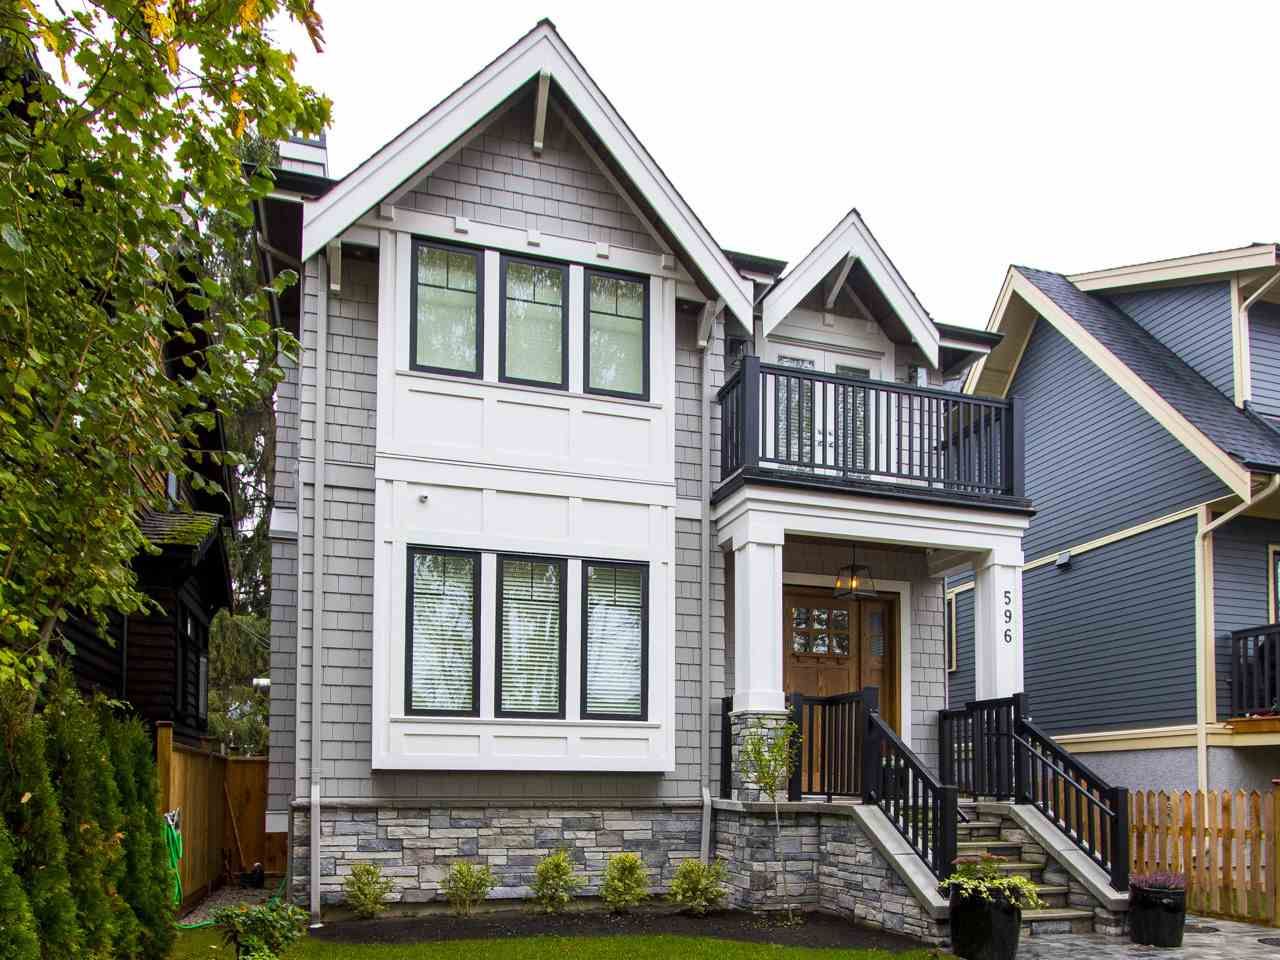 Main Photo: 596 W 17TH AVENUE in : Cambie House for sale : MLS®# R2009359